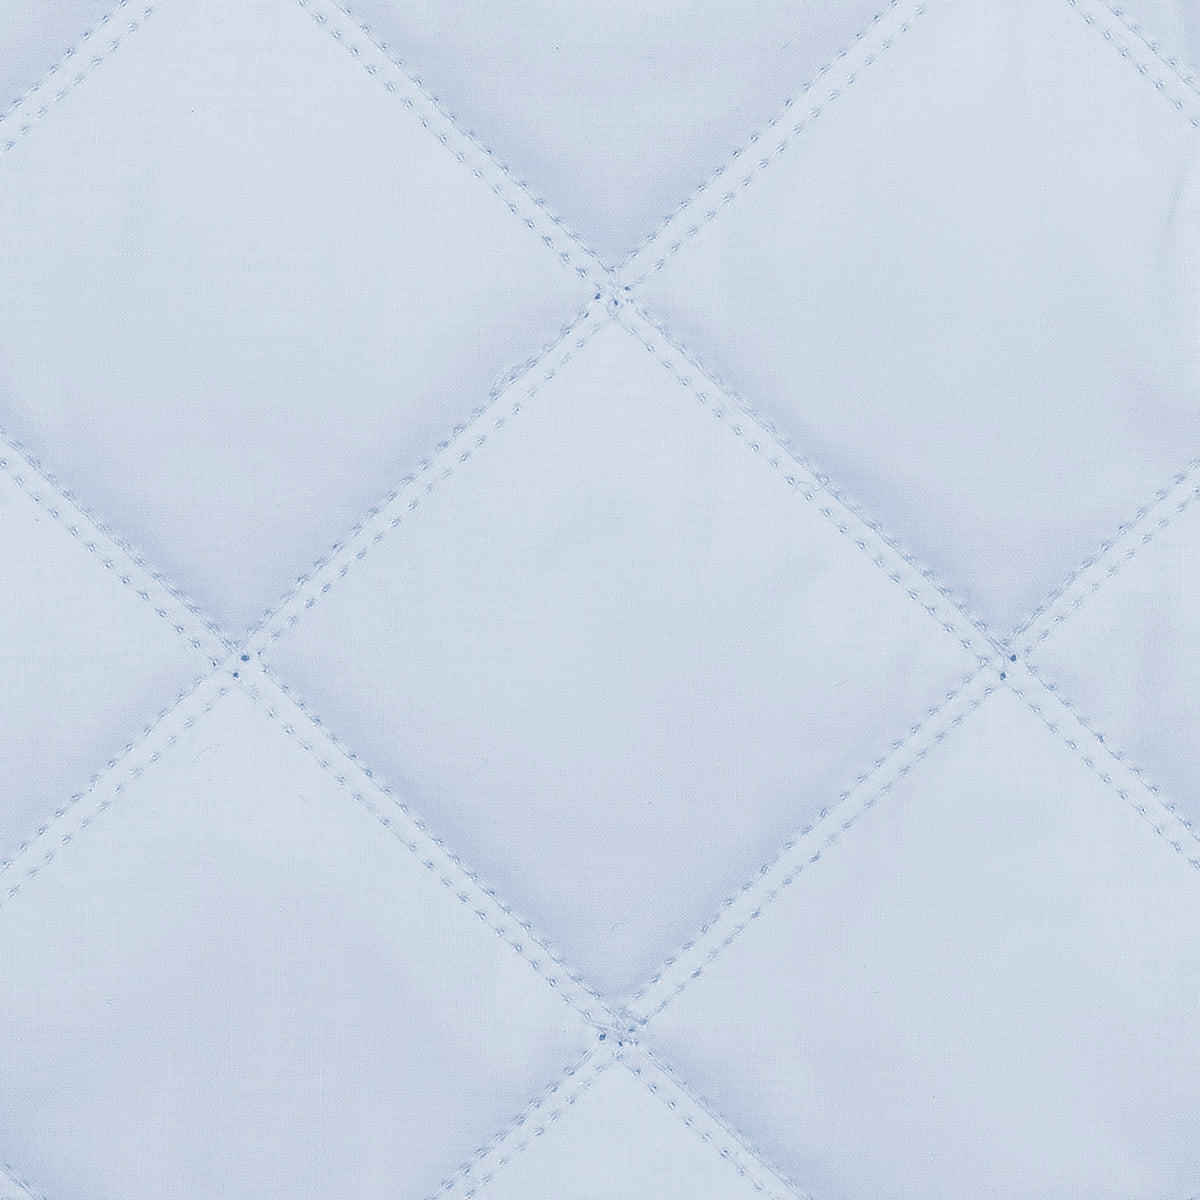 Swatch Sample of Matouk Milano Quilt Bedding in Color Sky